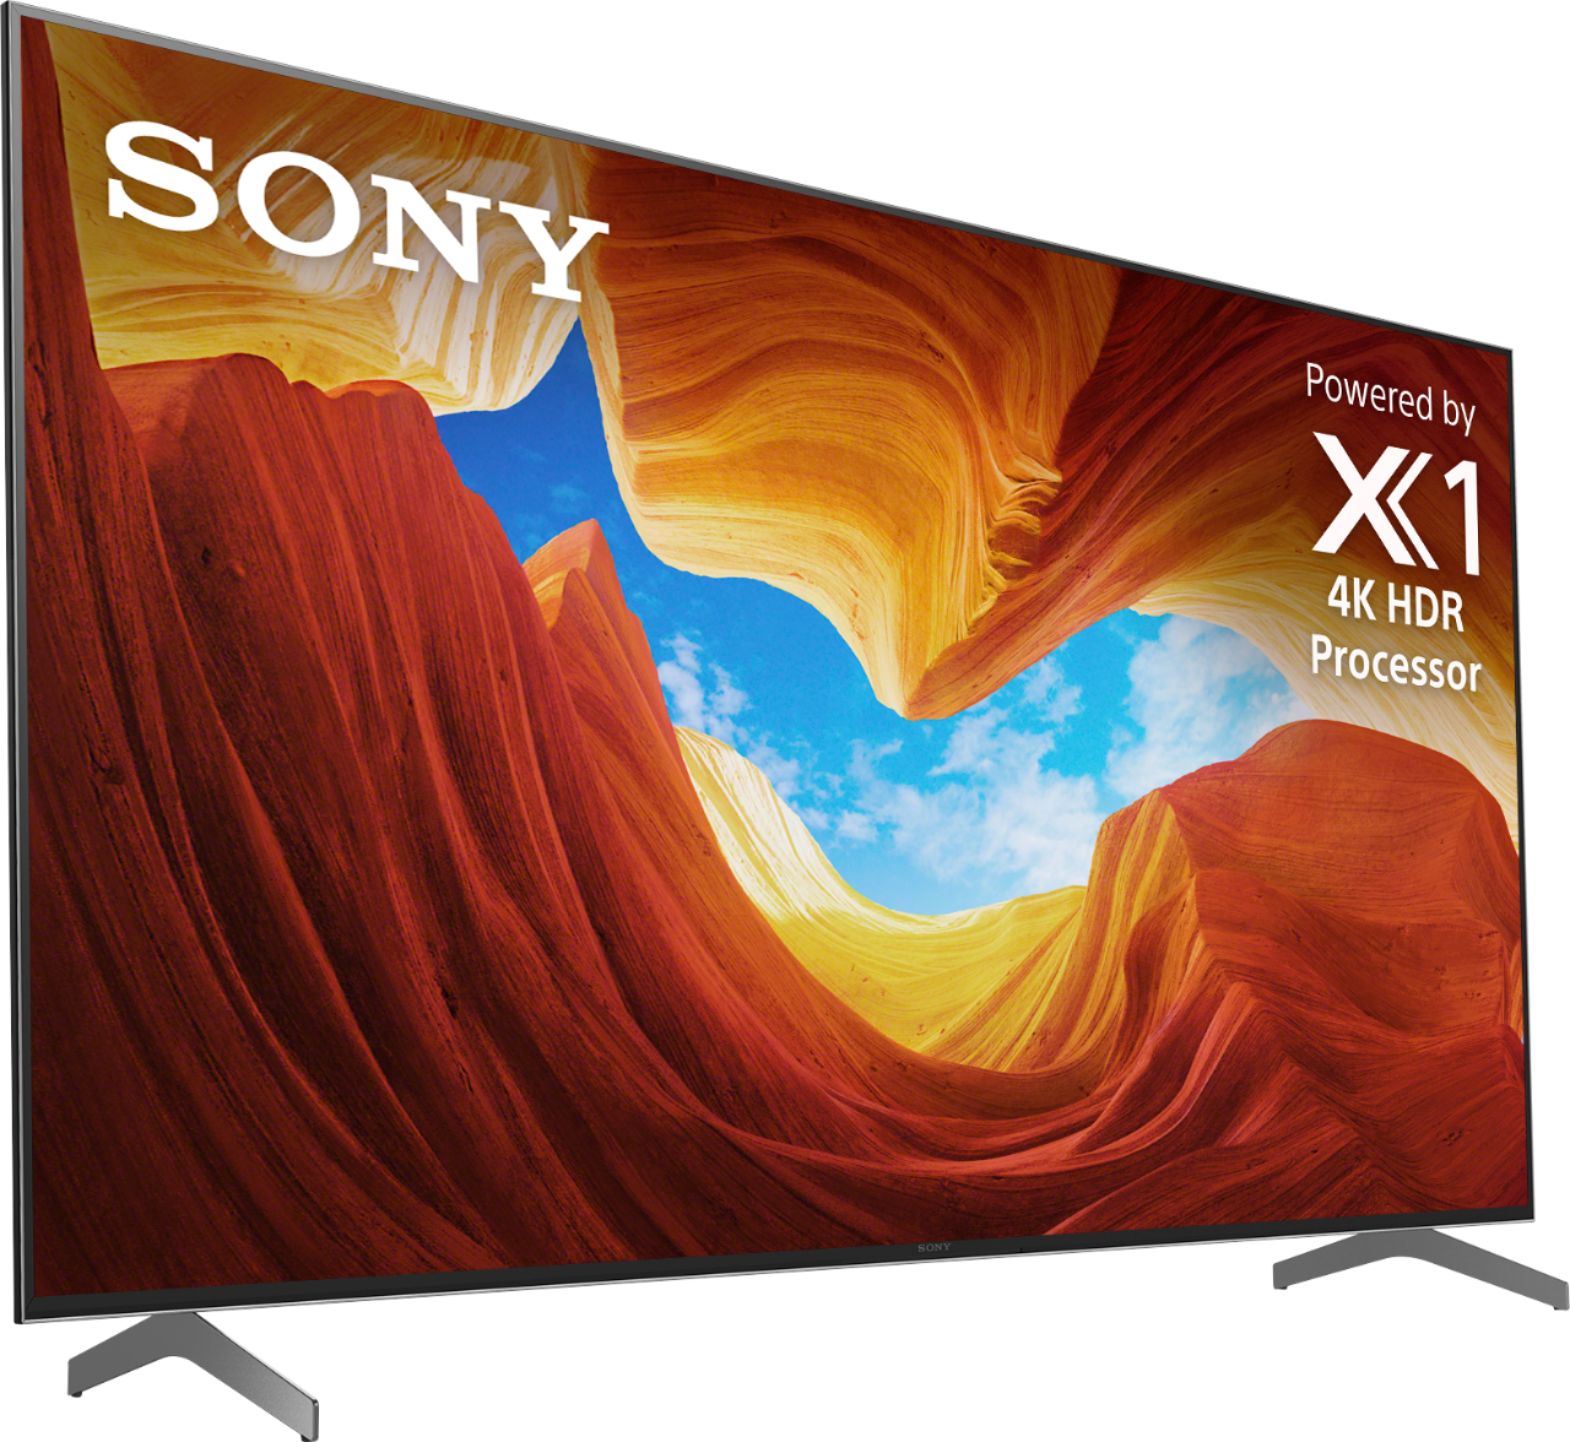 Angle View: Sony - 55" Class X900H Series LED 4K UHD Smart Android TV